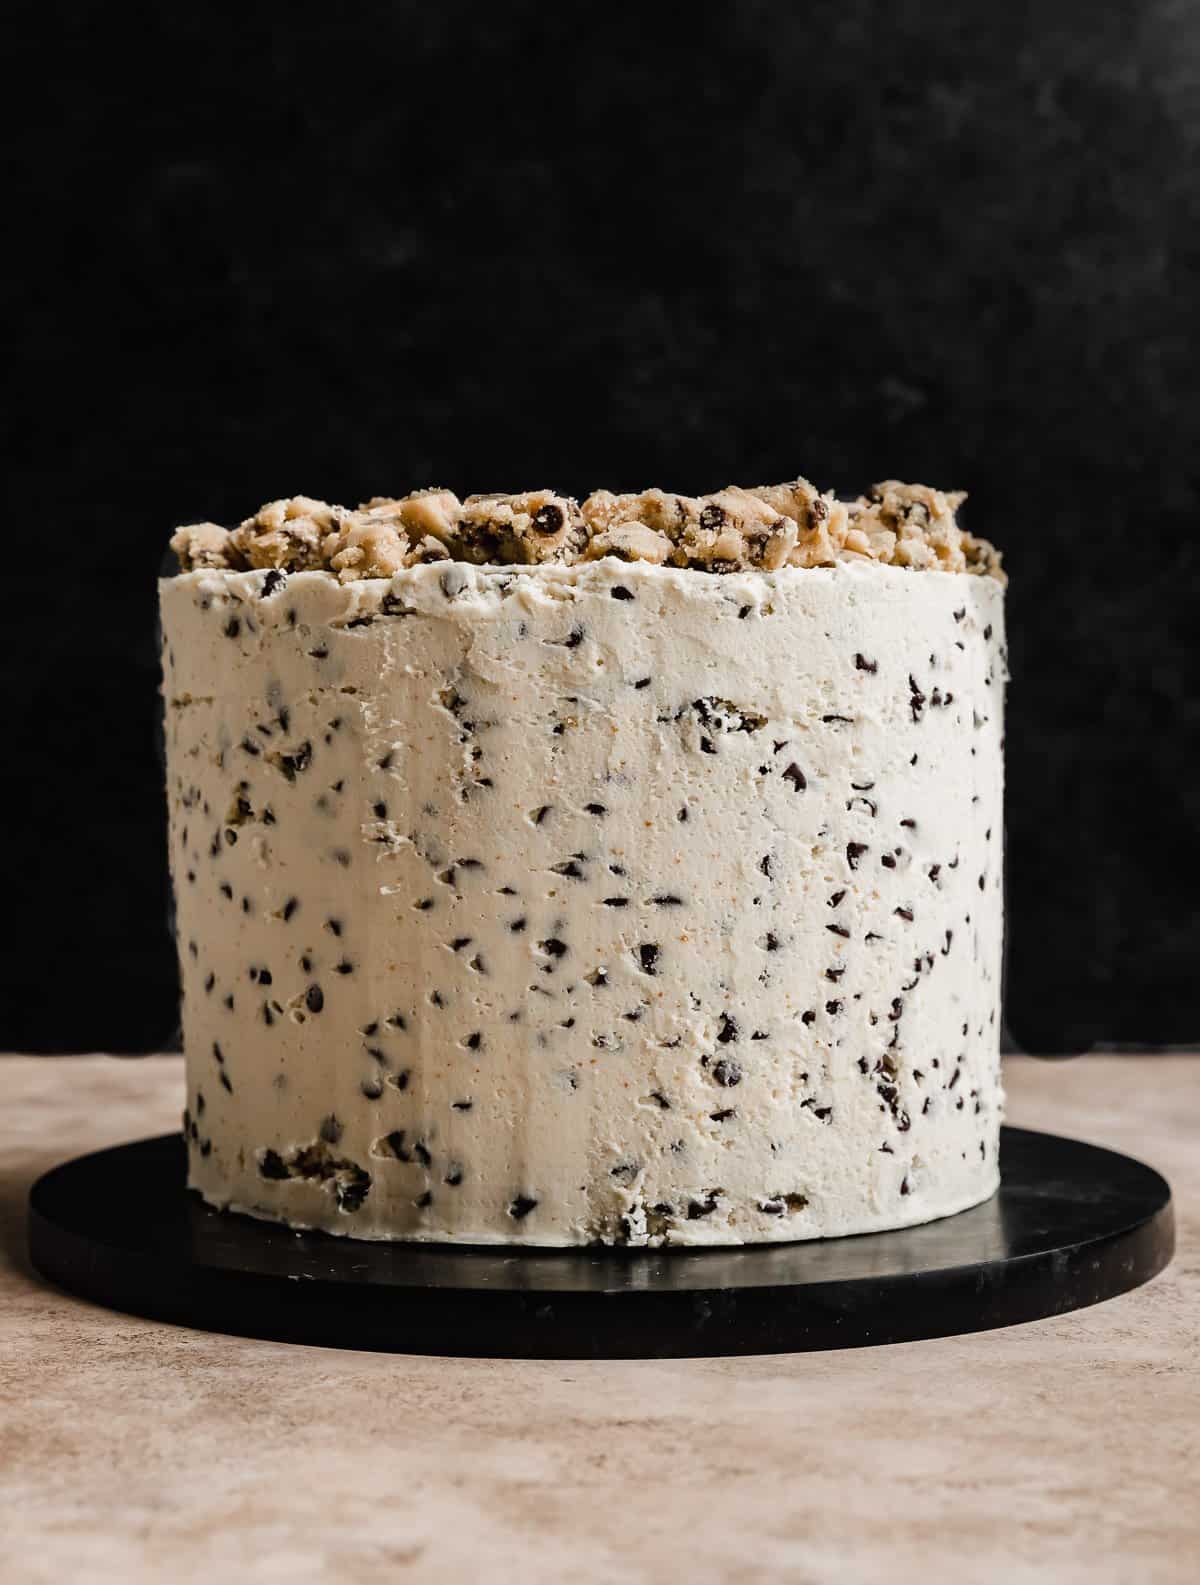 A three layered round Cookie Dough Cake frosted with white frosting that has mini chocolate chips in it, against a black background.